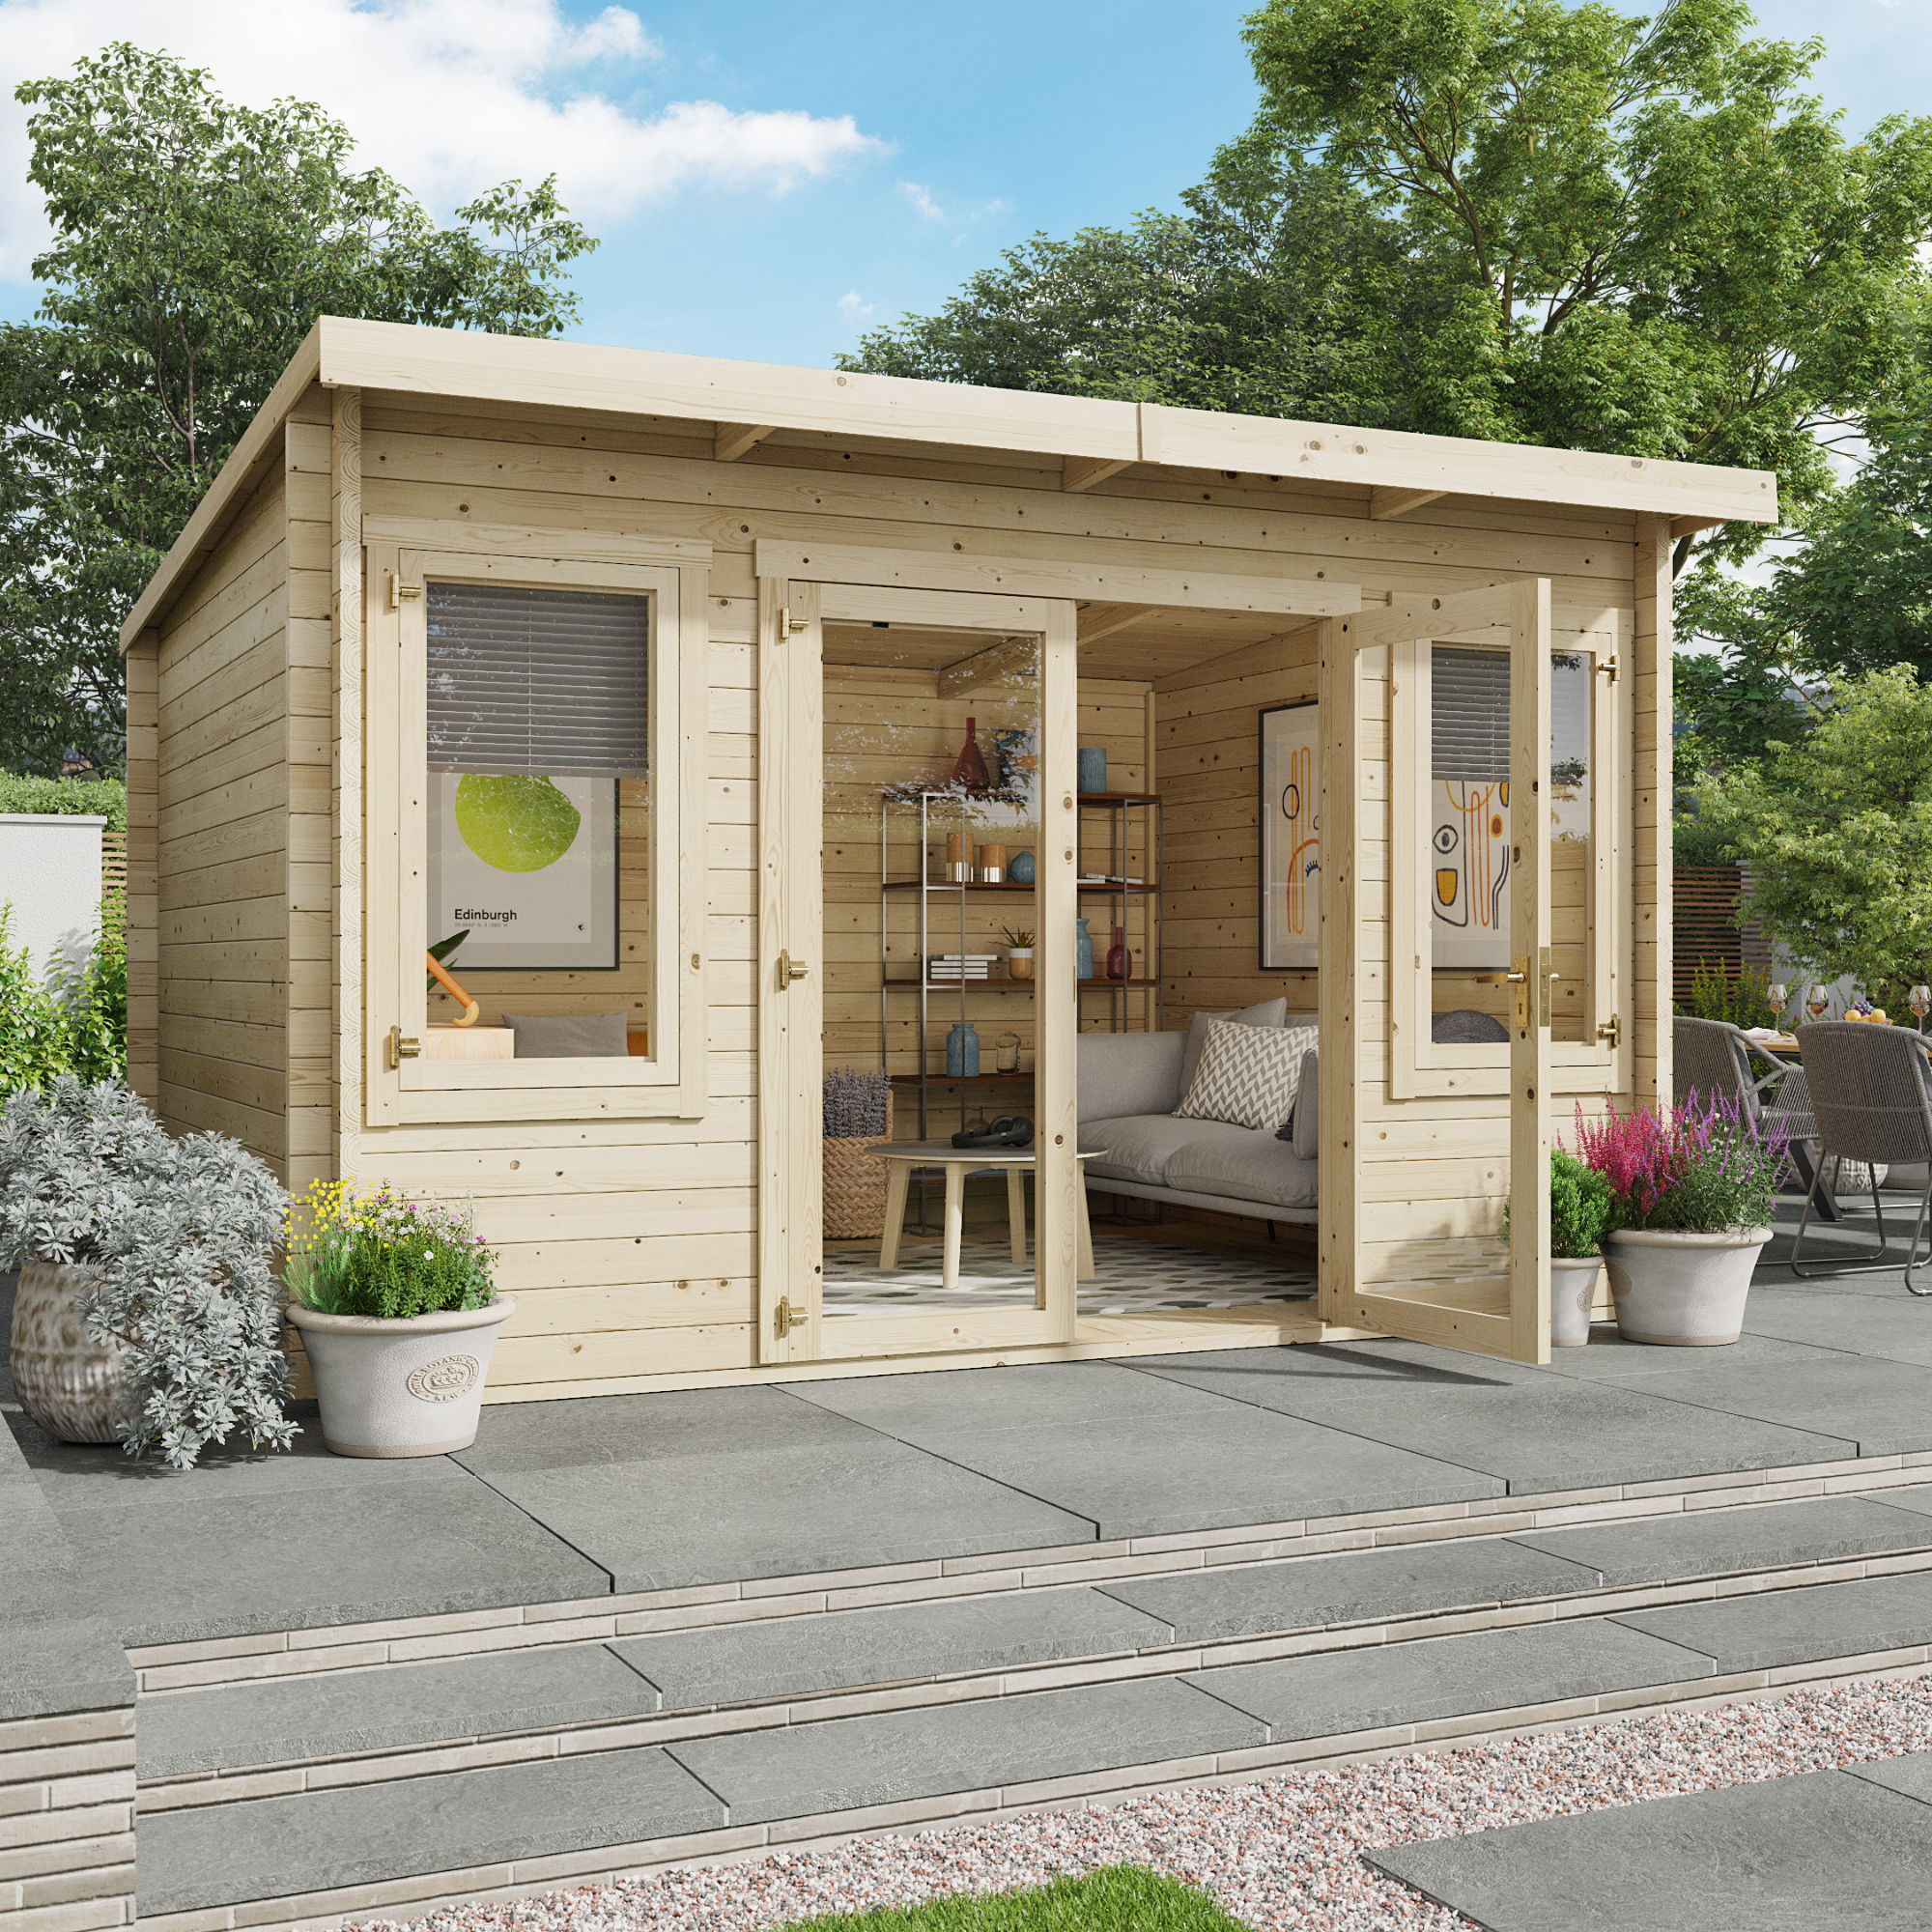 4.5 x 3 Pressure Treated Log Cabin - BillyOh Fraya Pent Log Cabin Summer House - 44mm Thickness Wooden Log Cabin Summer Houses - 4.m x 3m